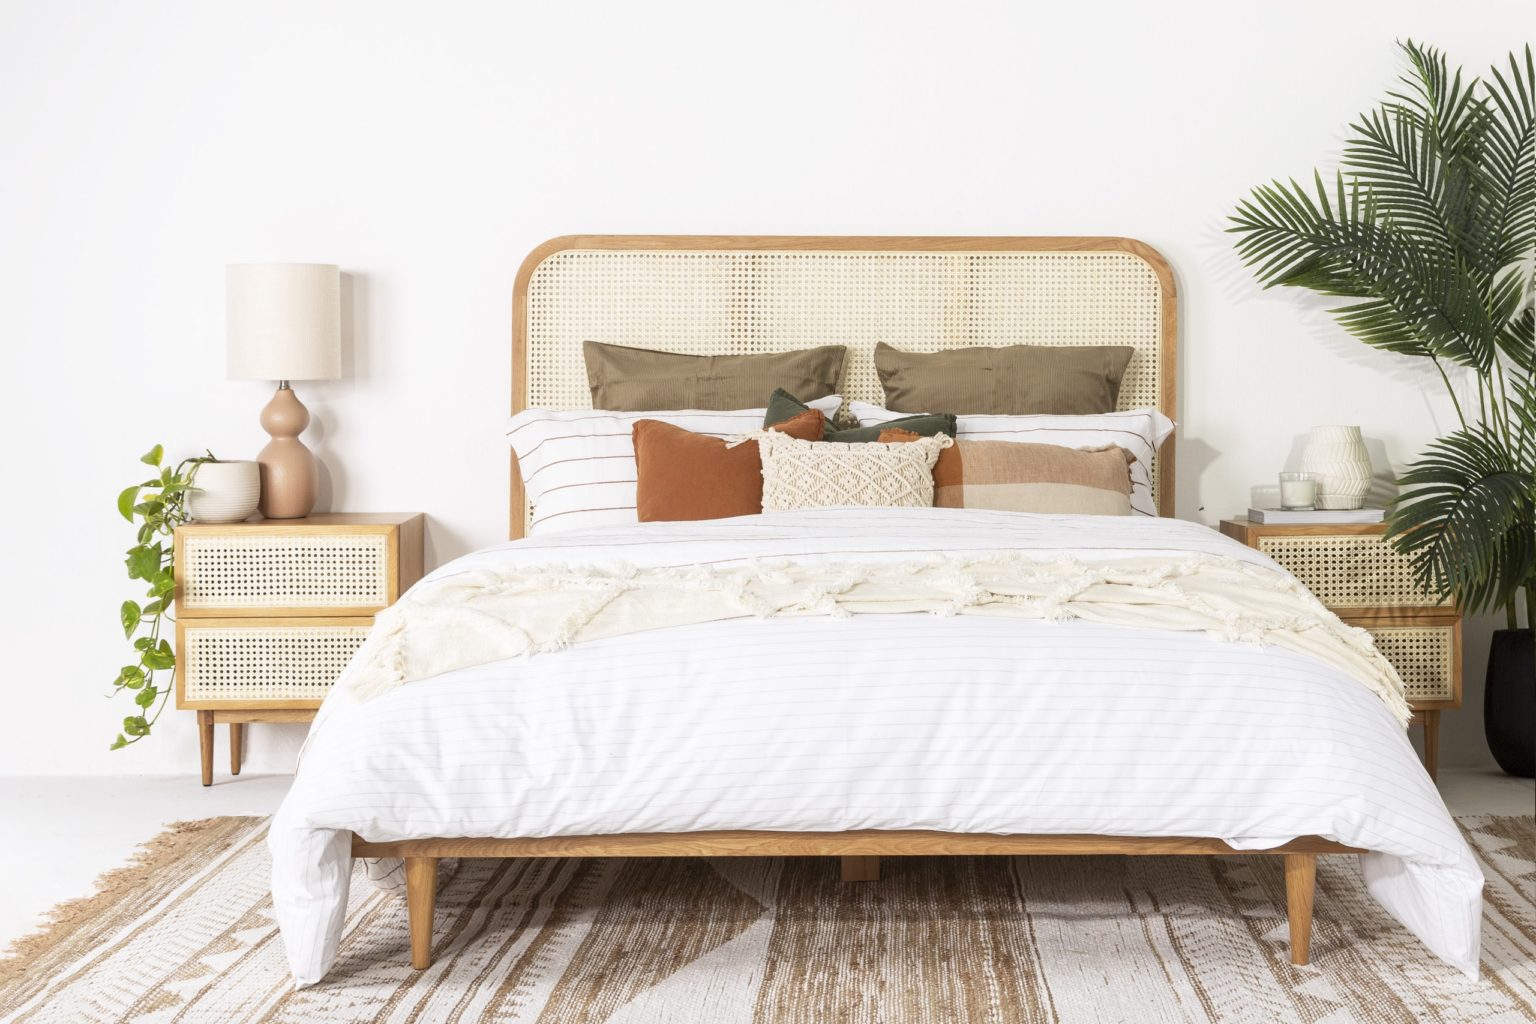 Turn your bedroom into the ultimate zen space with these great tips ...